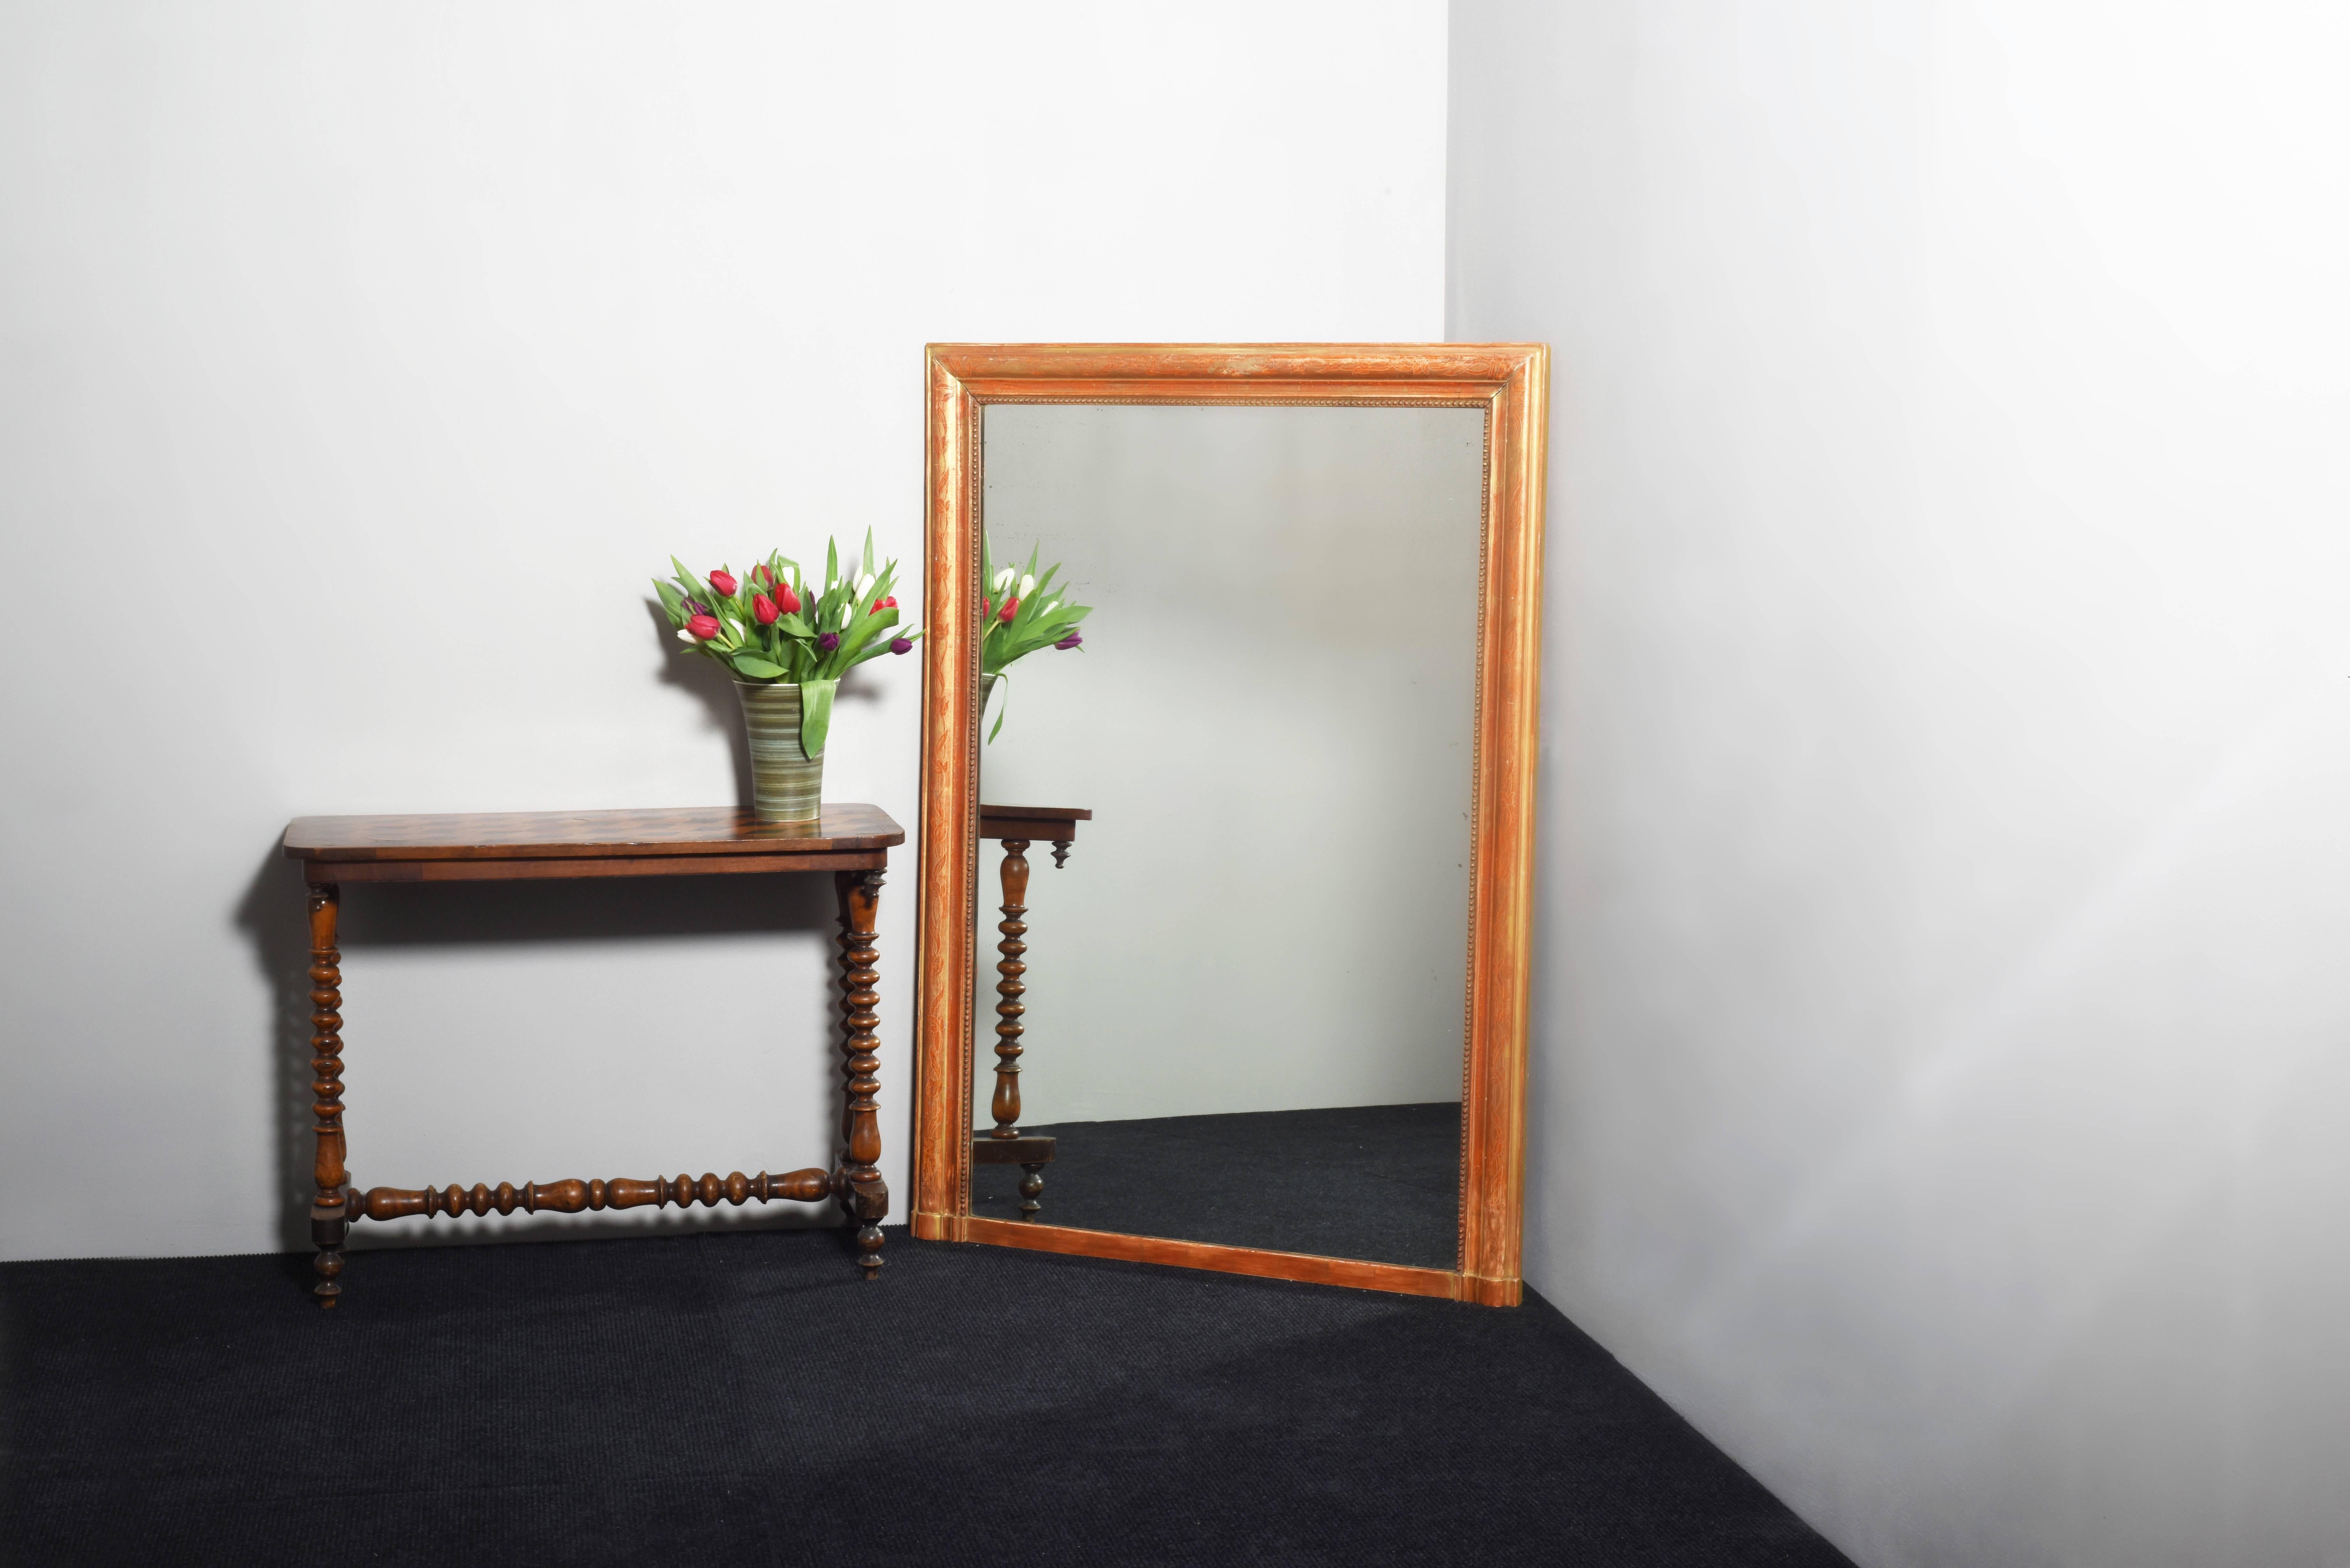 An attractive French mirror with a continual incised floral white cut design to the main section. The mirror has an attractive worn appearance, showing a fair amount of original red or orange under color, giving the gilding an attractive and rich